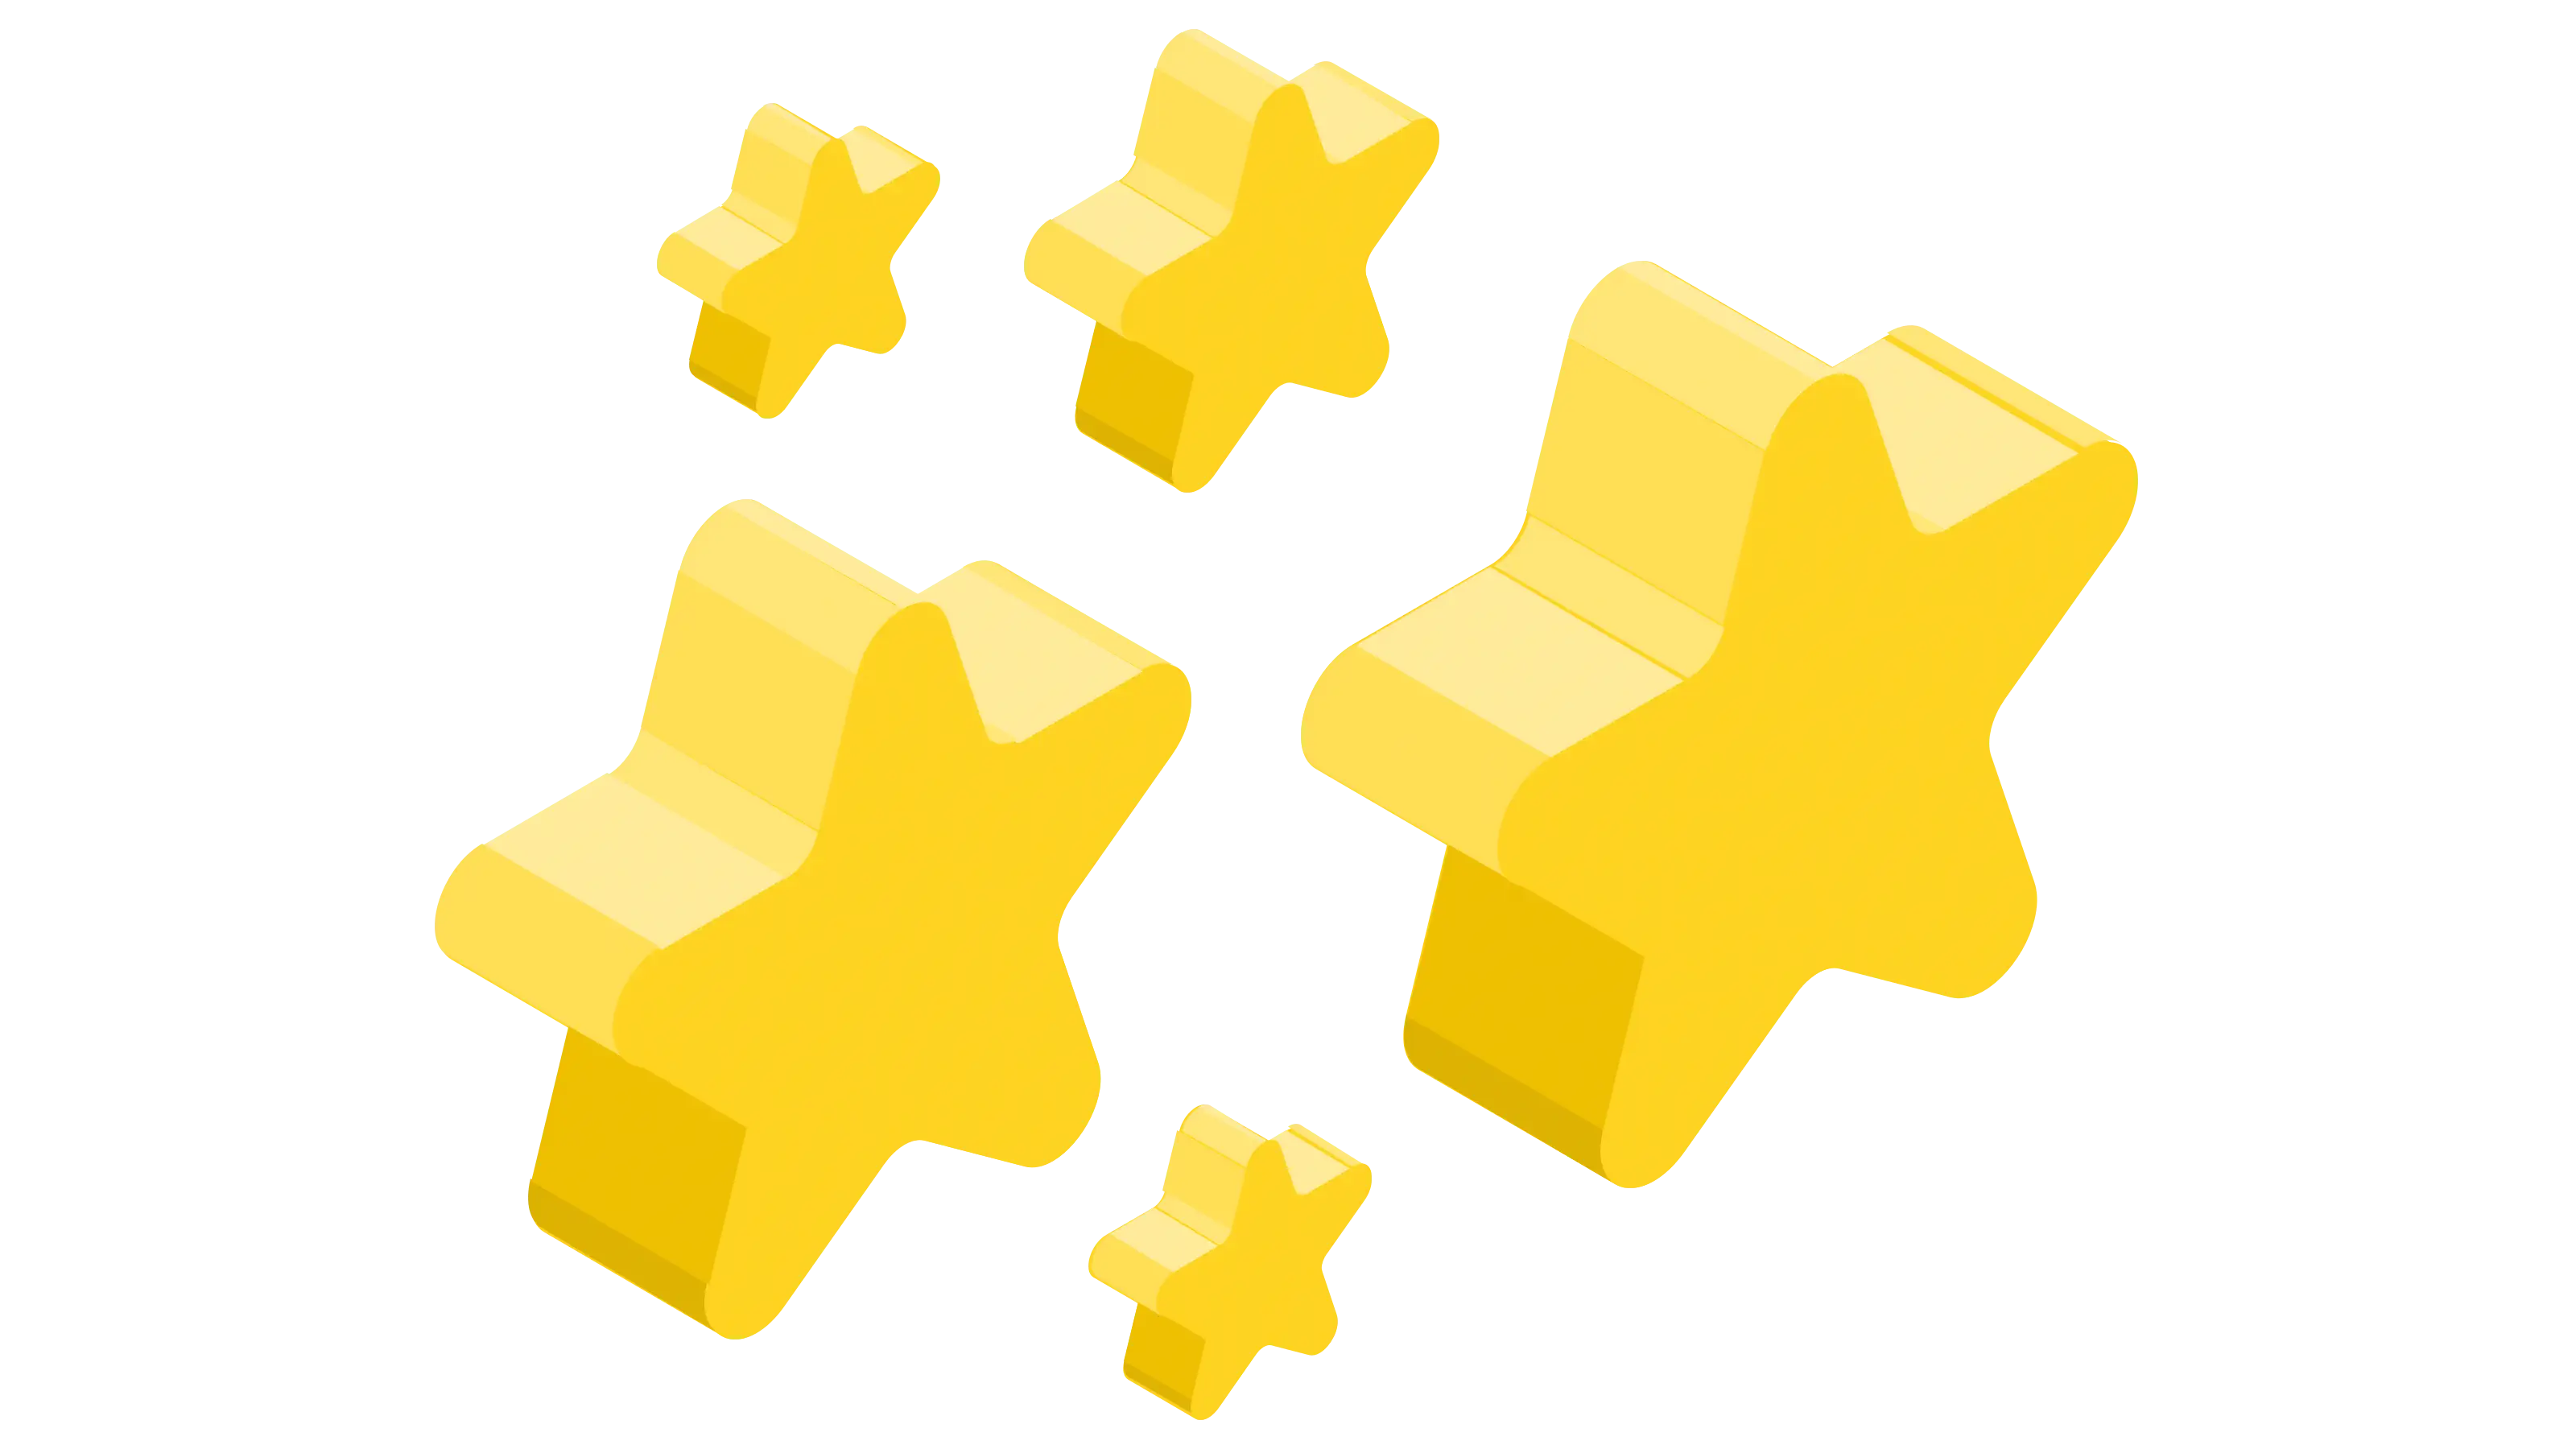 5 yellow stars in various sizes